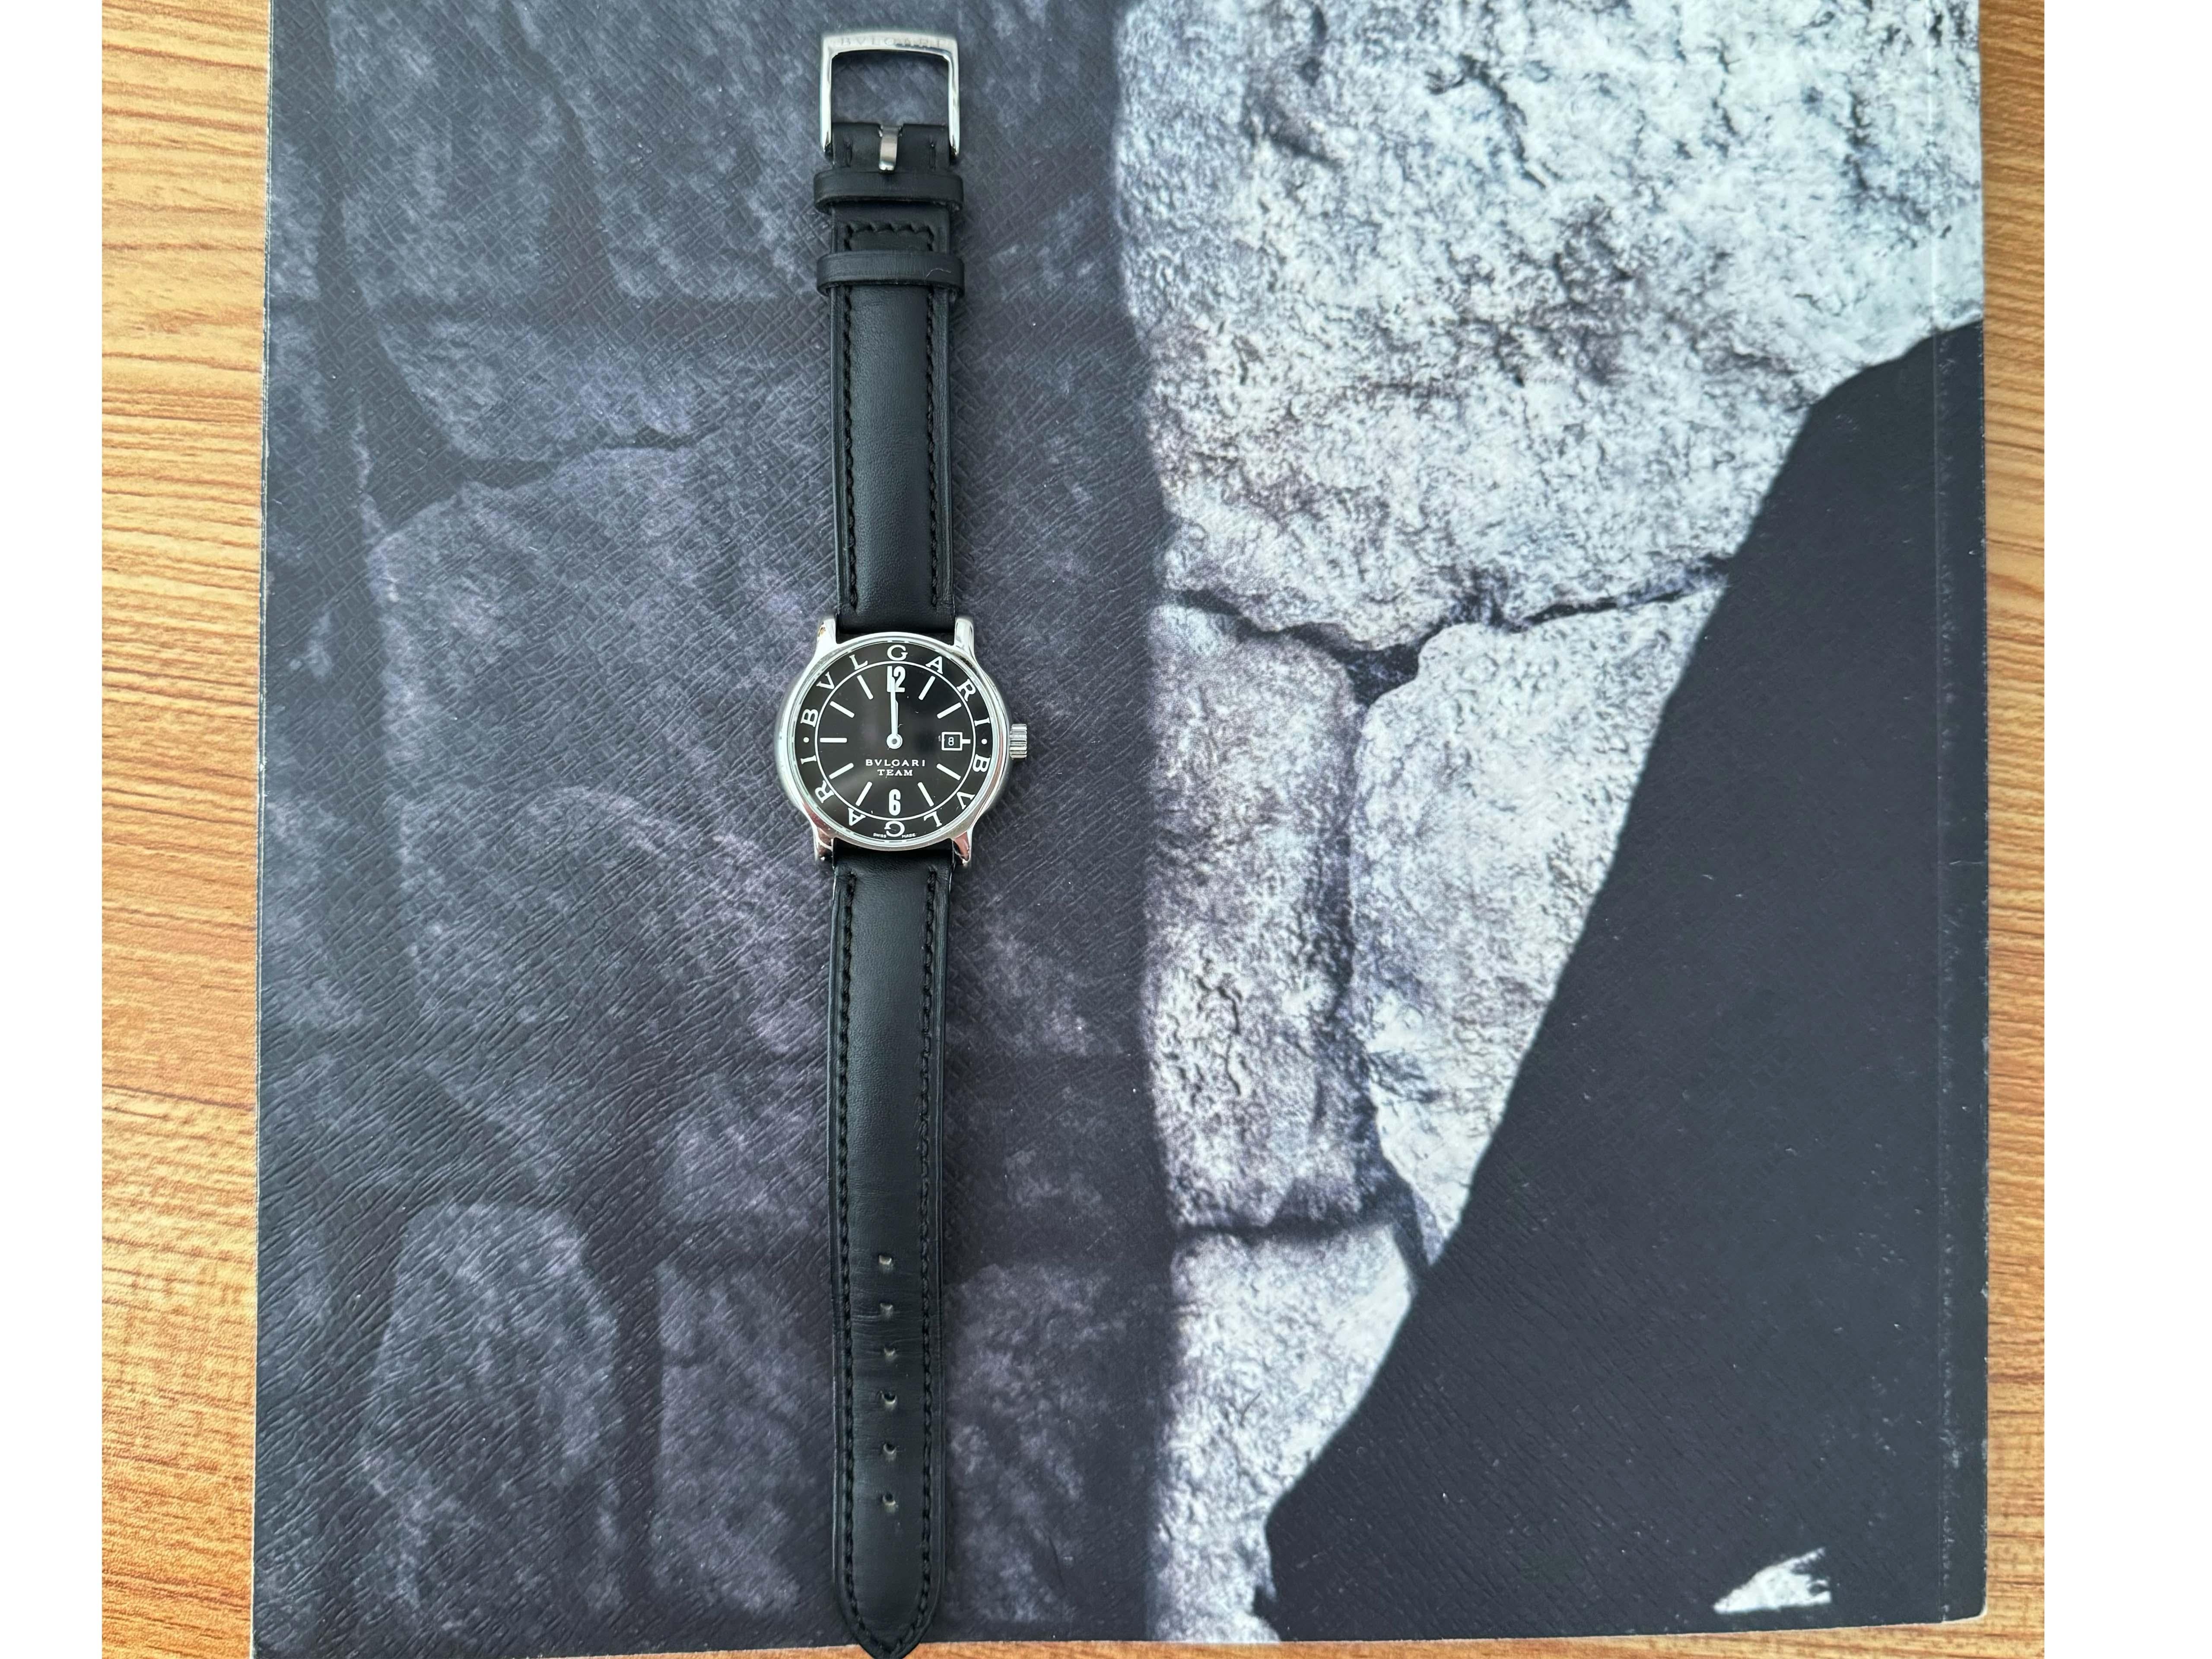 BVLGARI Team Watch Leather Strap 28mm In Excellent Condition For Sale In Honolulu, HI